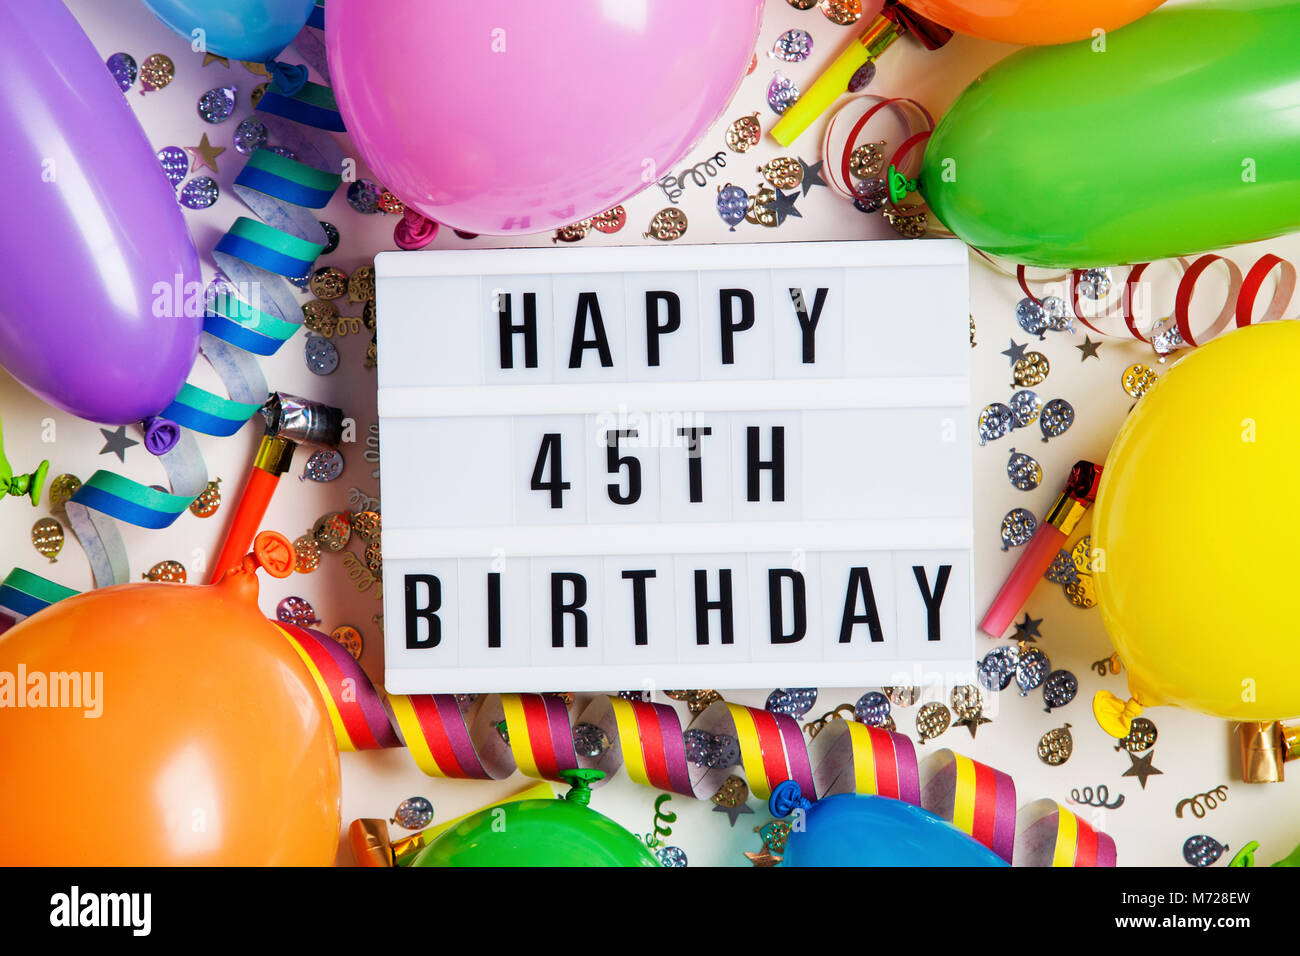 Happy 45th birthday celebration message on a lightbox with balloons and confetti Stock Photo